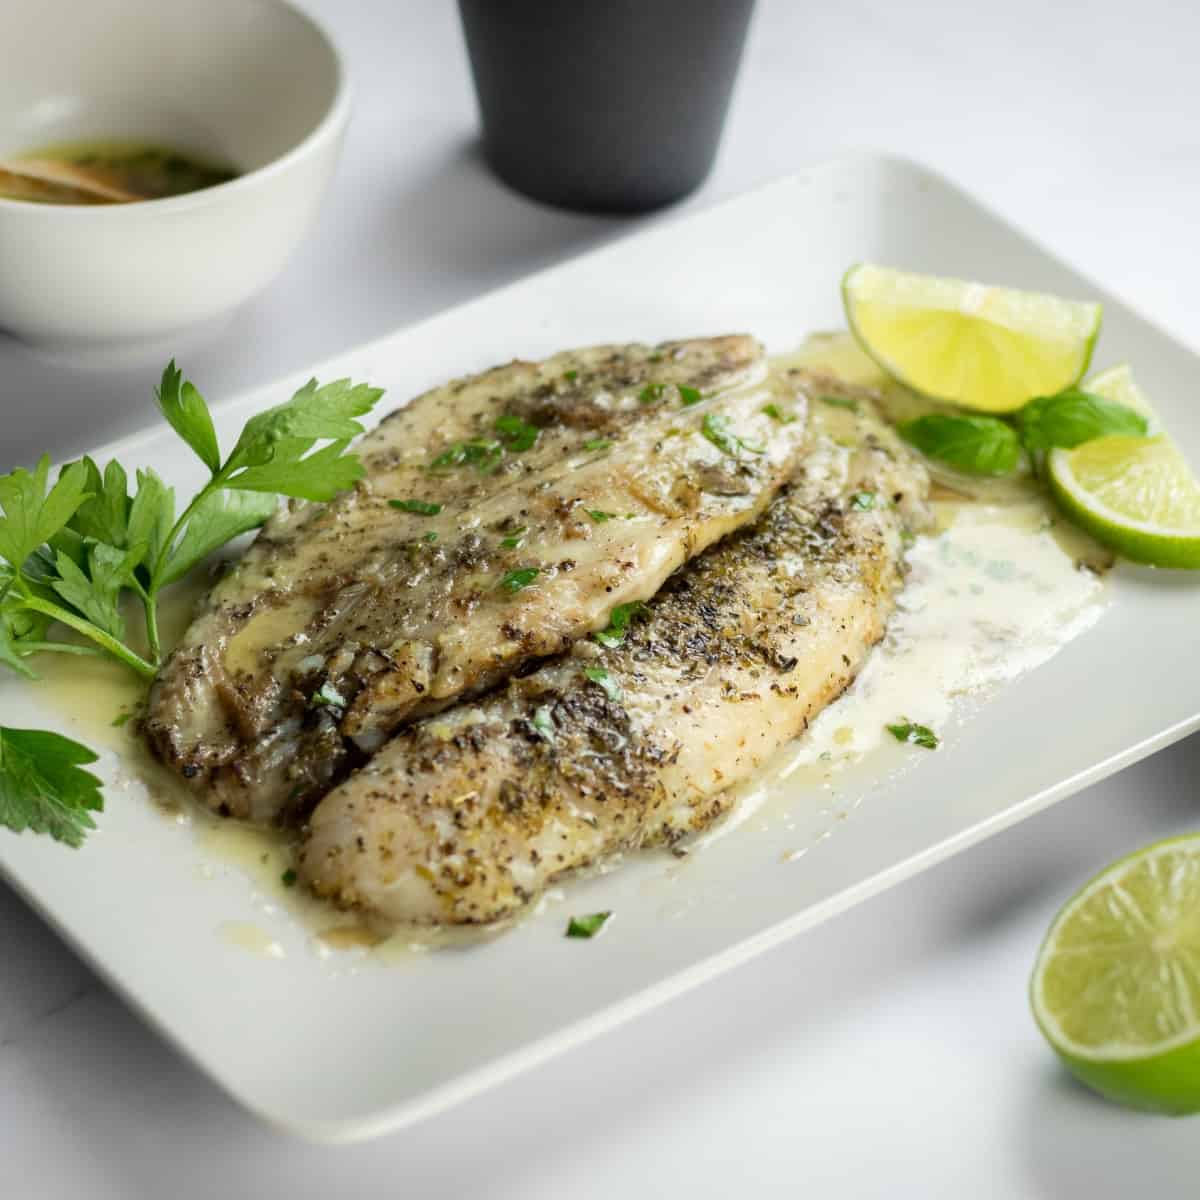 Pan-fried halibut filets with lemon butter sauce on a plate garnished with fresh green herbs and slices of lemon.